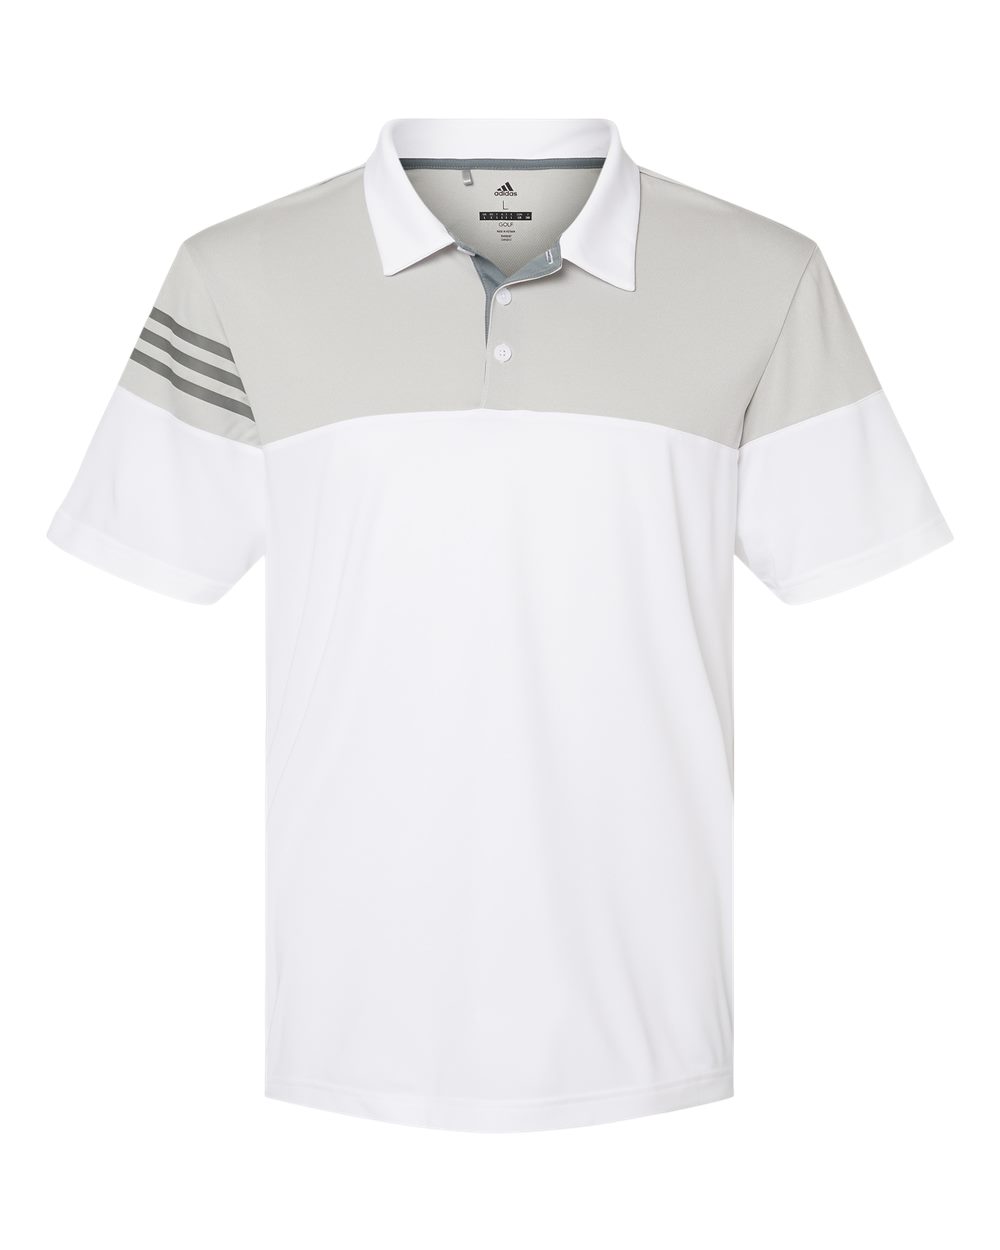 Picture of Adidas Heathered 3-Stripes Colorblocked Polo